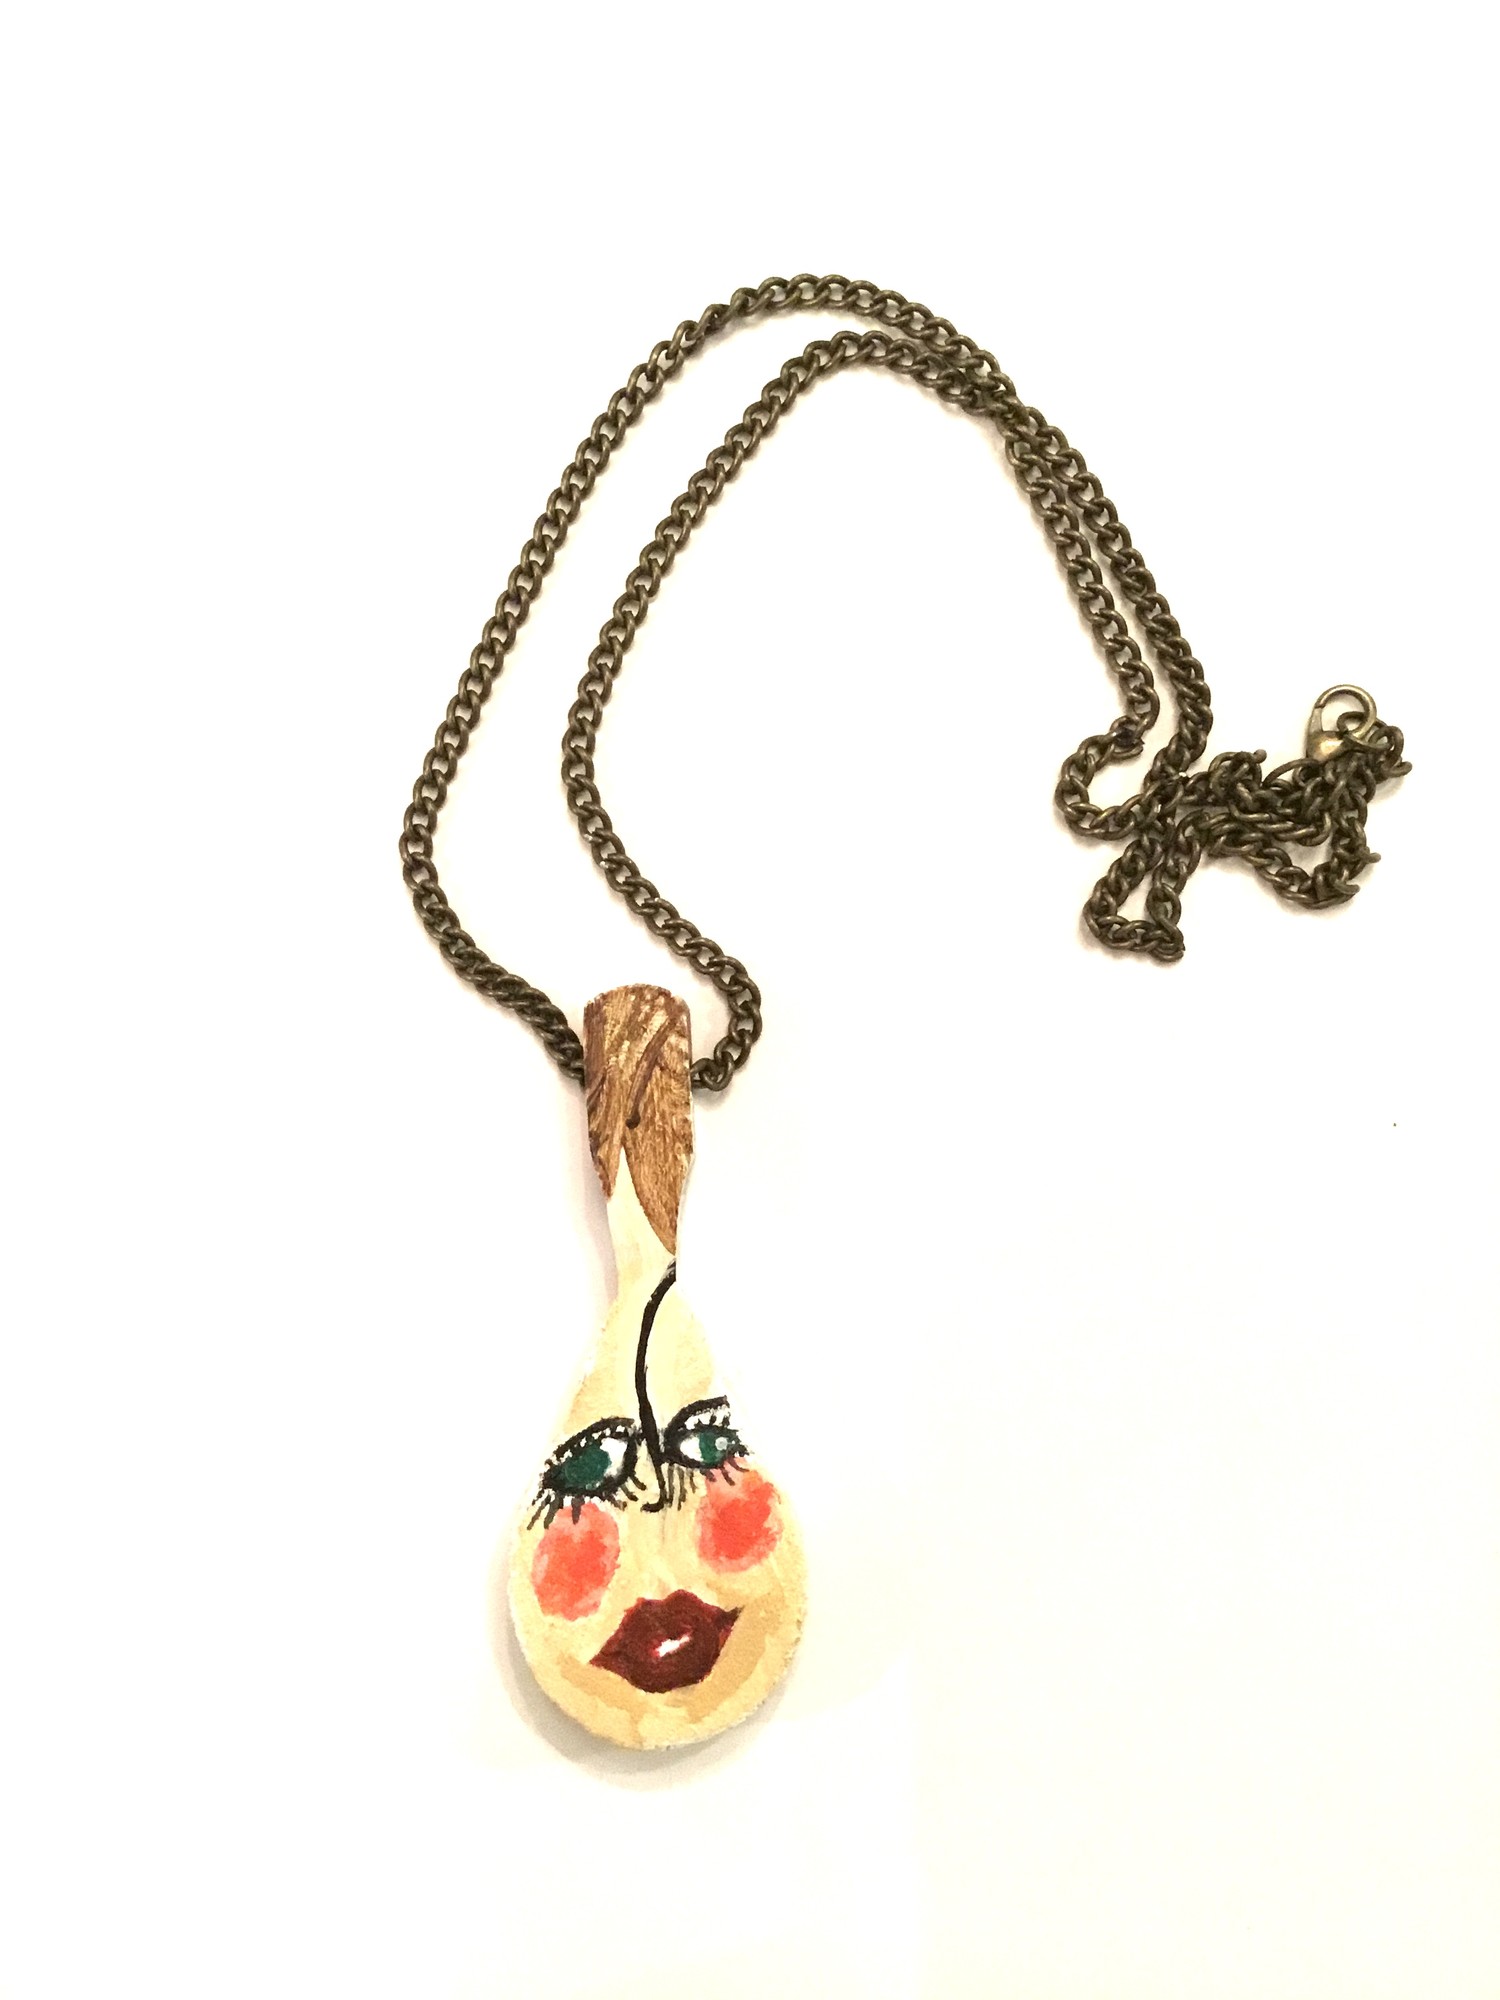 Hand painted funny face piano key necklace

Please select hair color below!